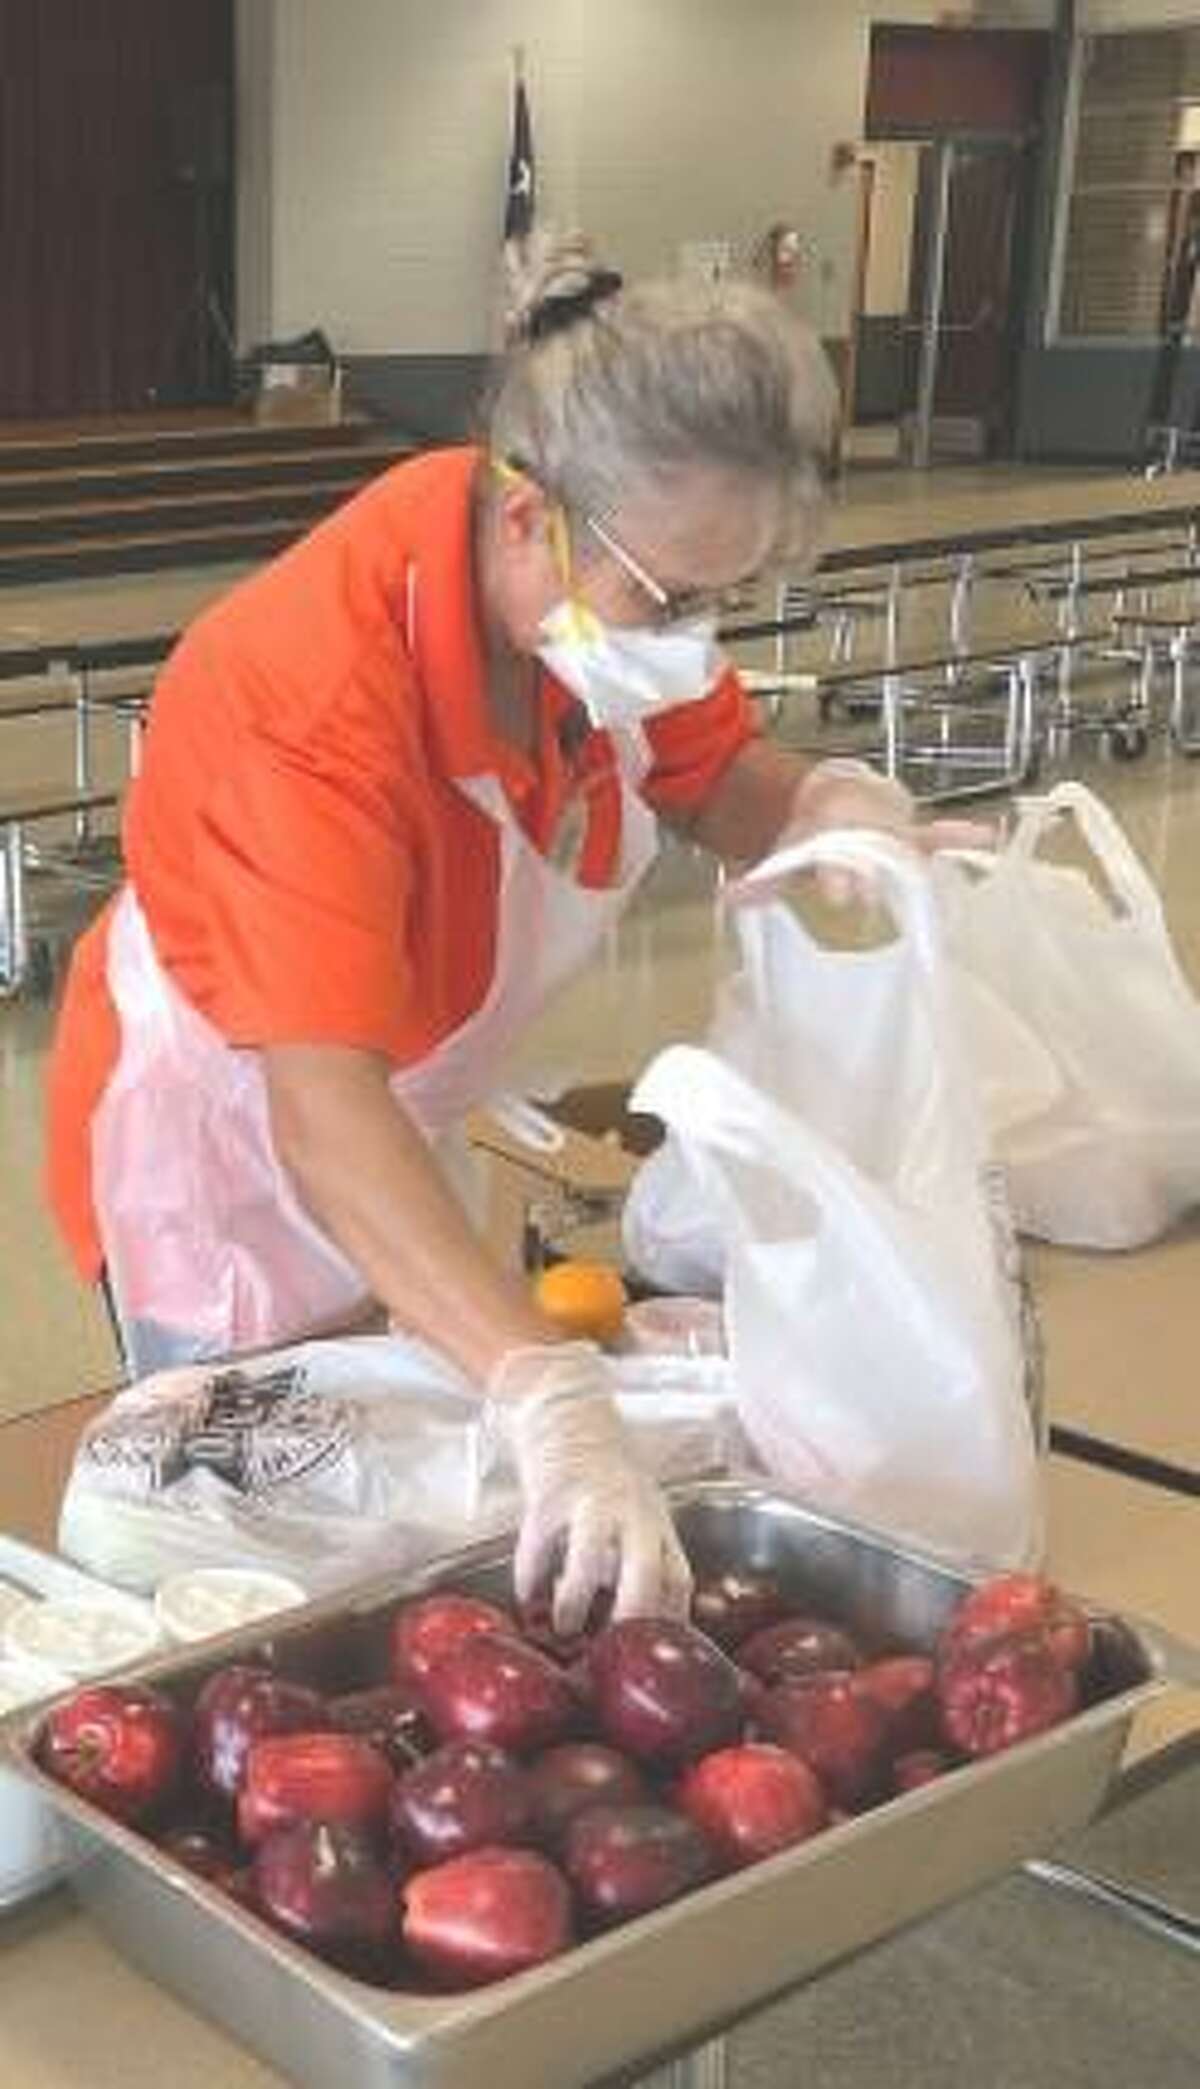 The Magnolia ISD Child Nutrition Department distributes meals to children during the COVID-19 pandemic.